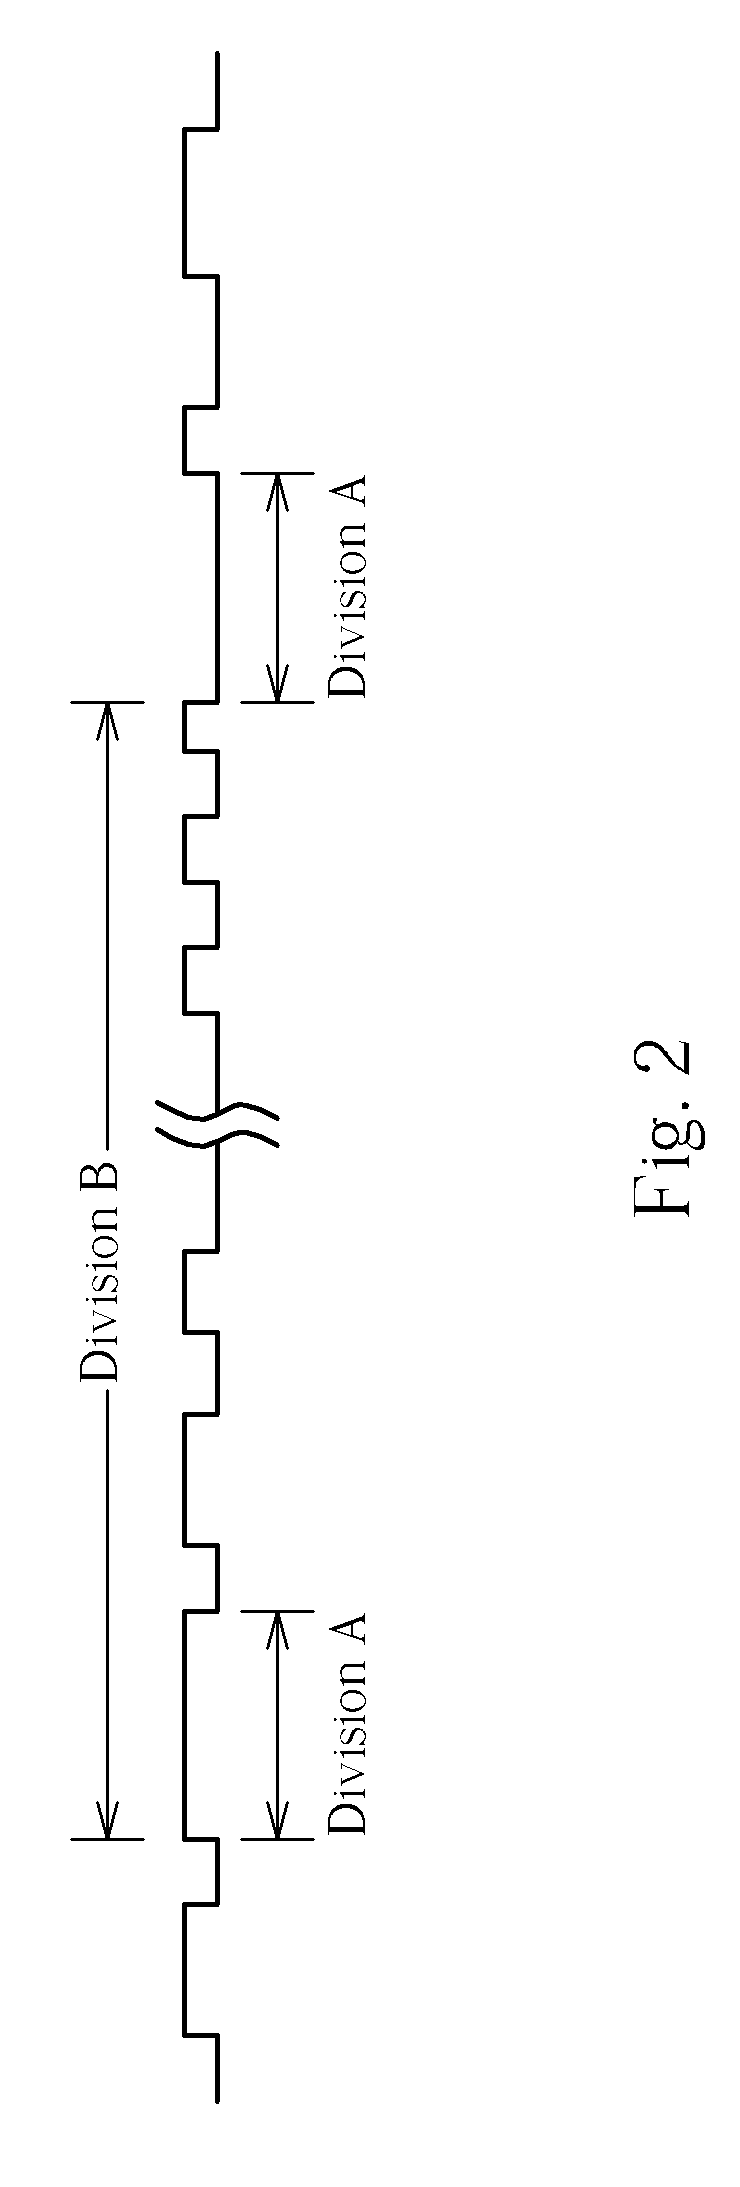 Clock generating apparatus and method in optical storage system